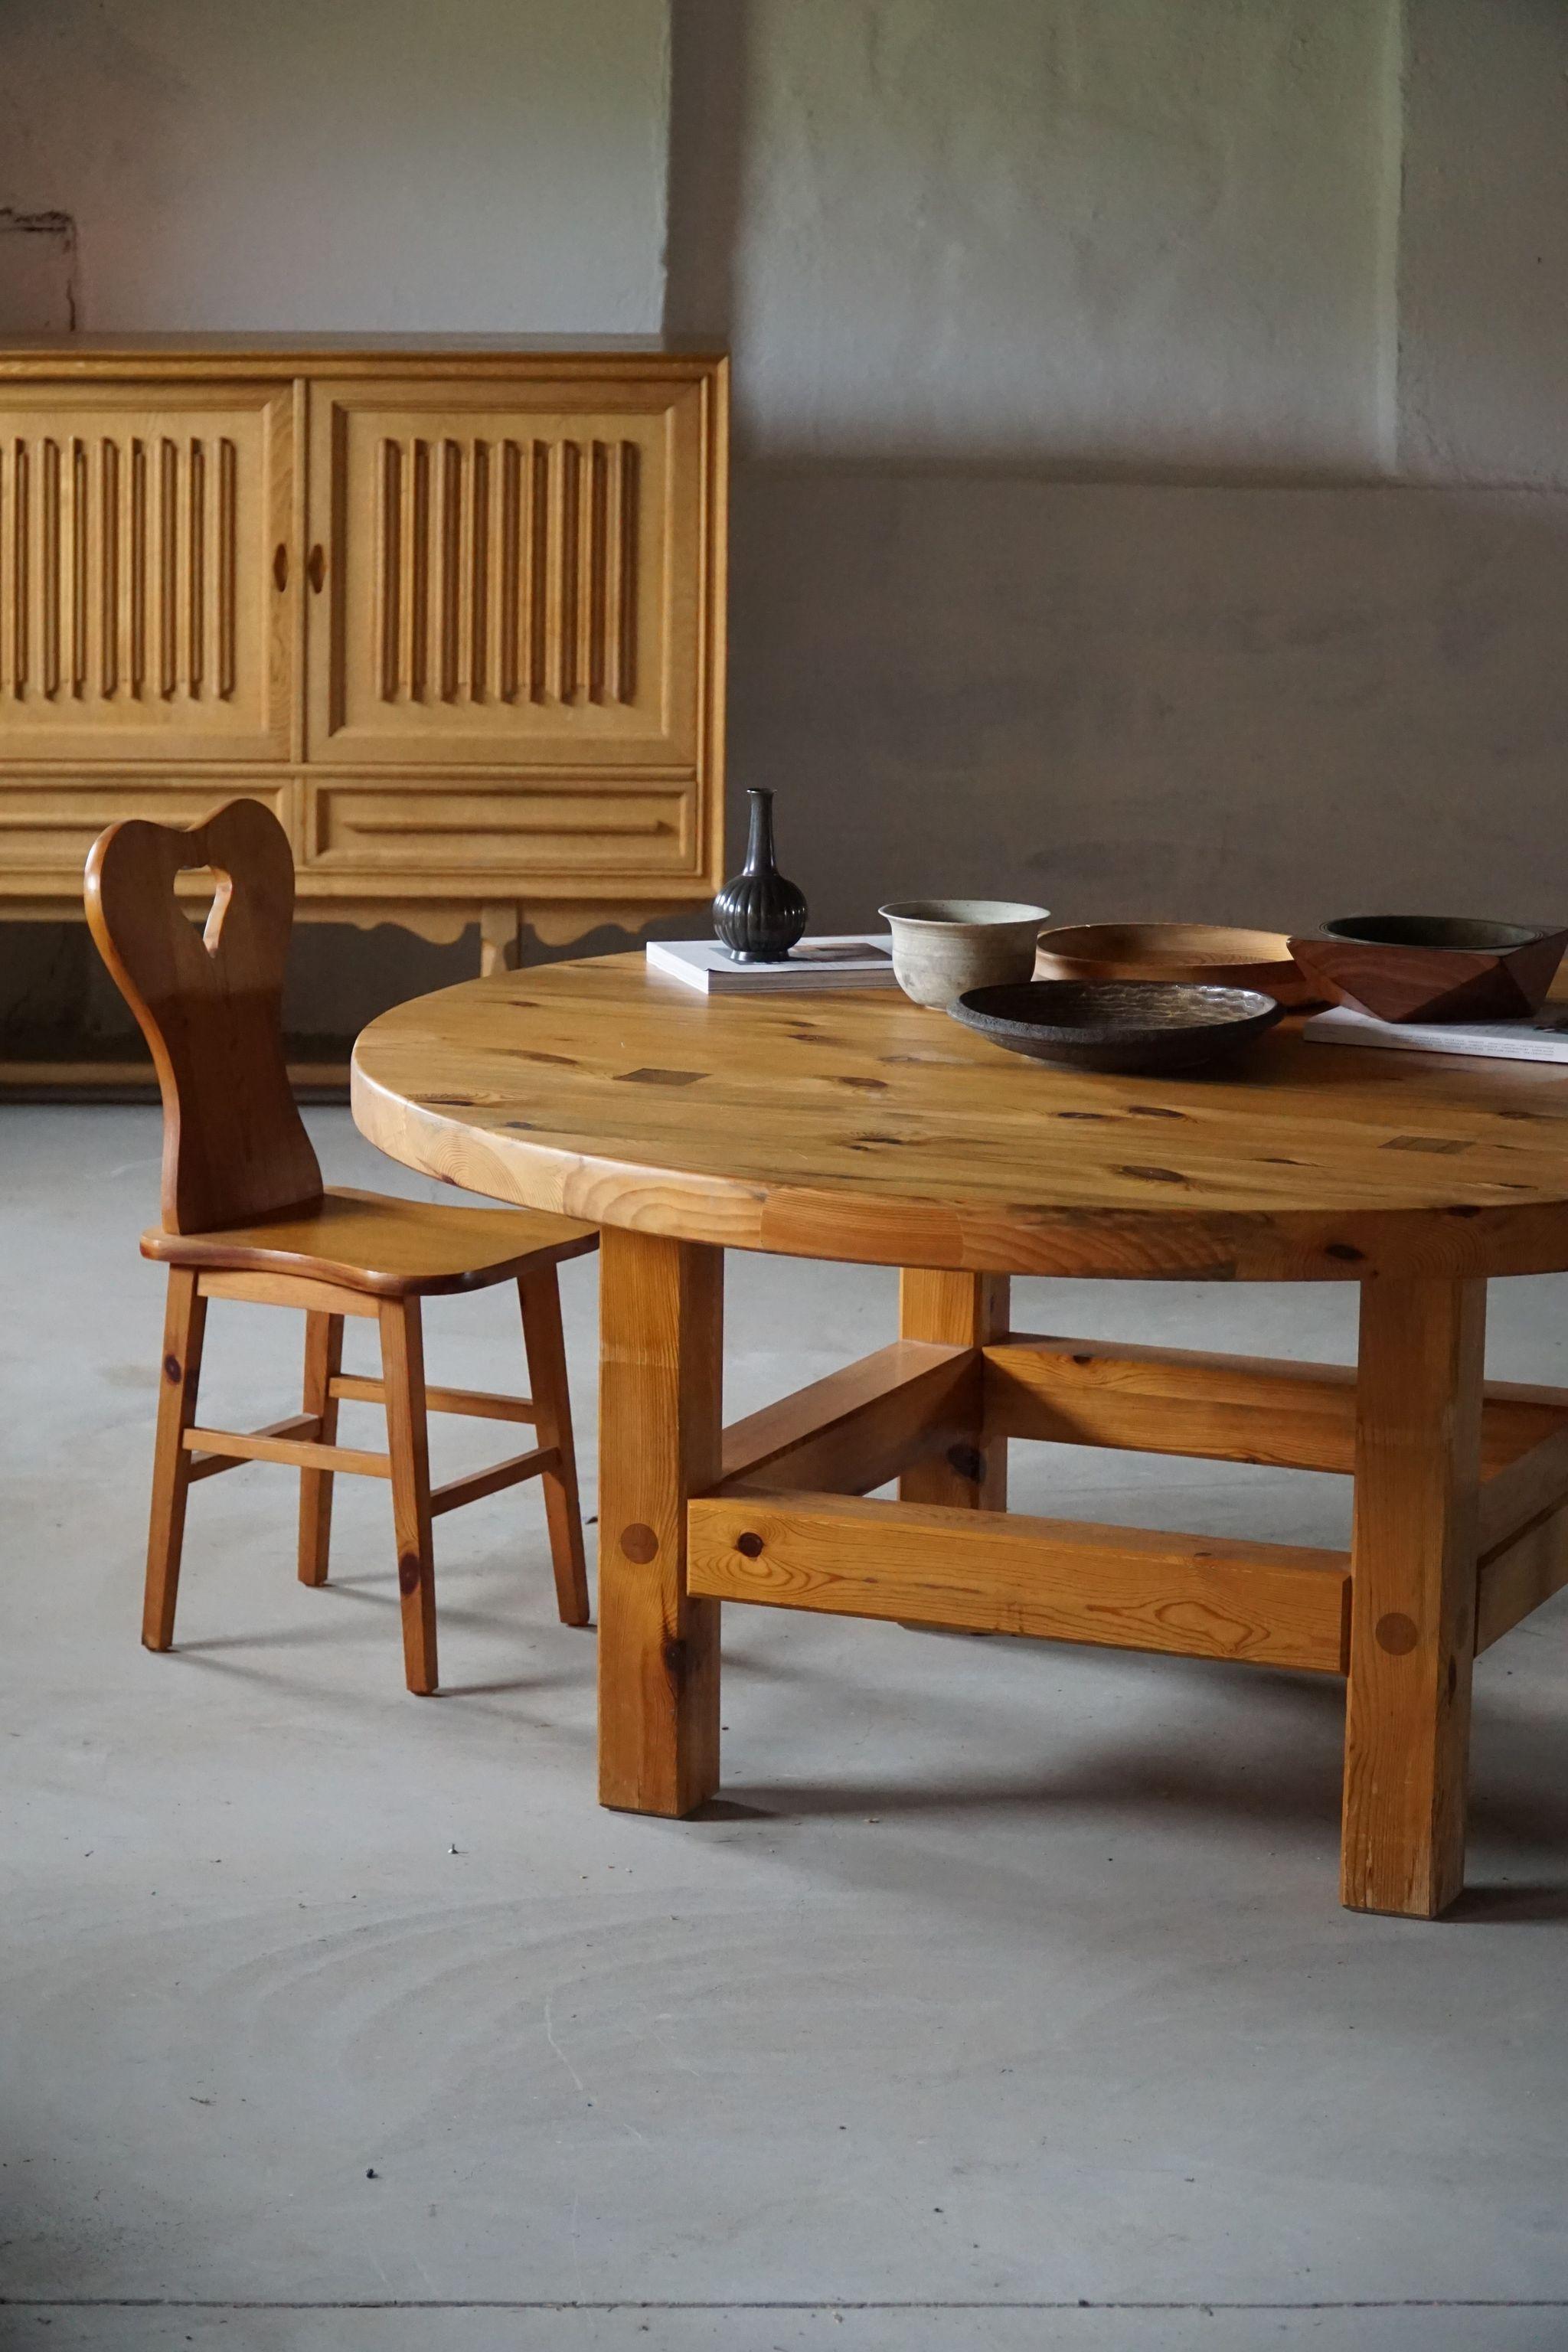 Sven Larsson, Large Round Dining Table in Solid Pine, Swedish Modern, 1960s For Sale 4